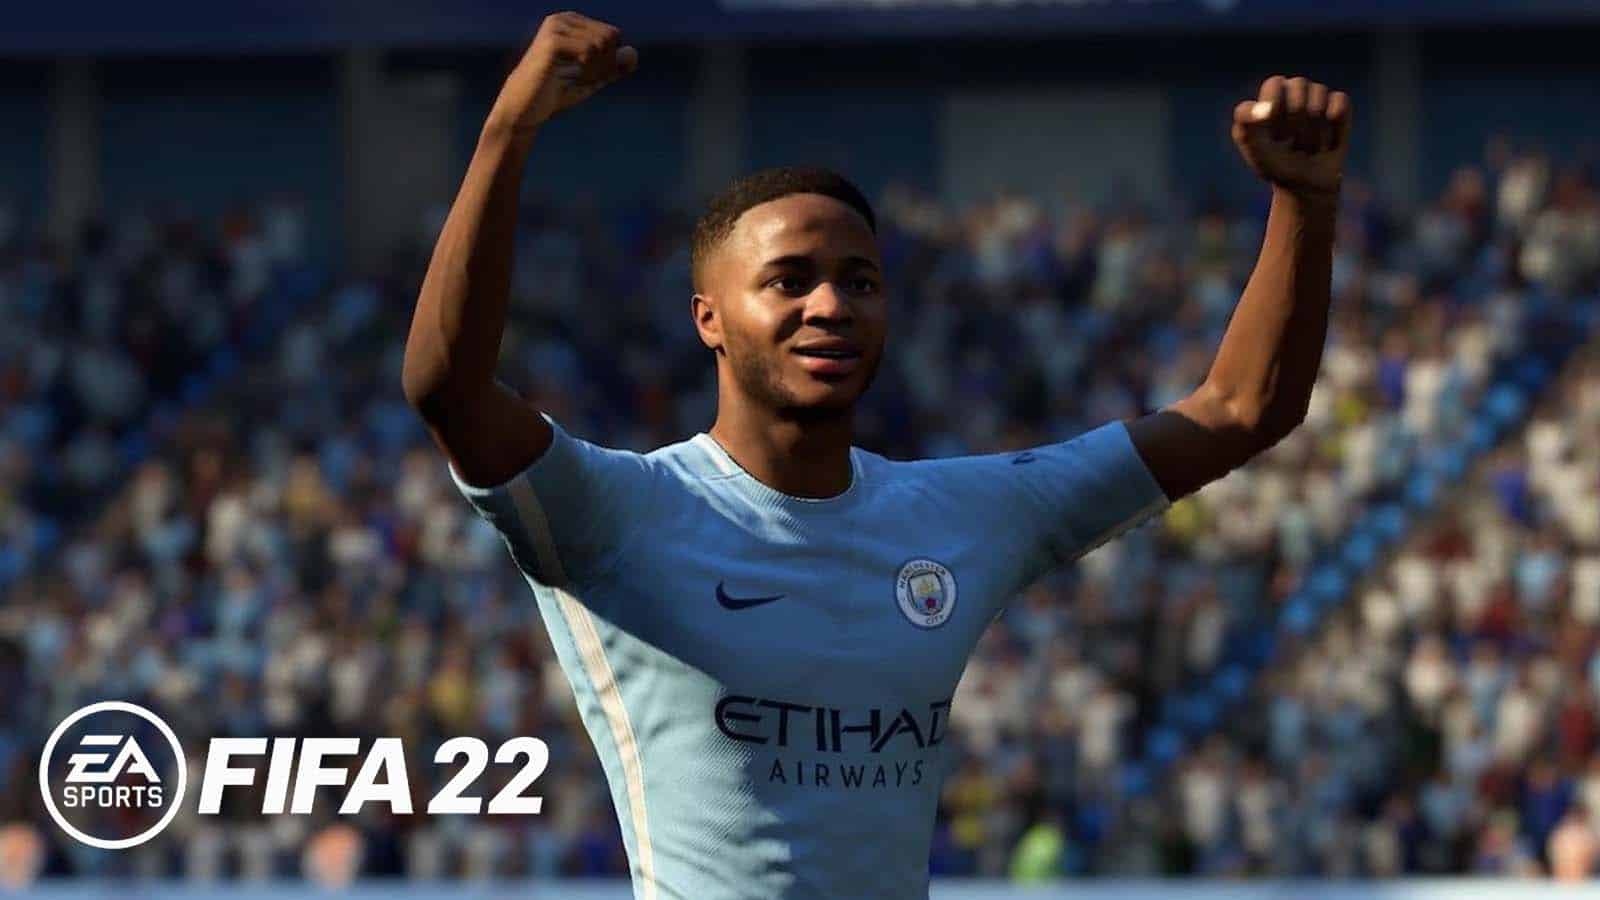 FIFA 22 has changed quick sell prices and it could make FUT players loads of coins